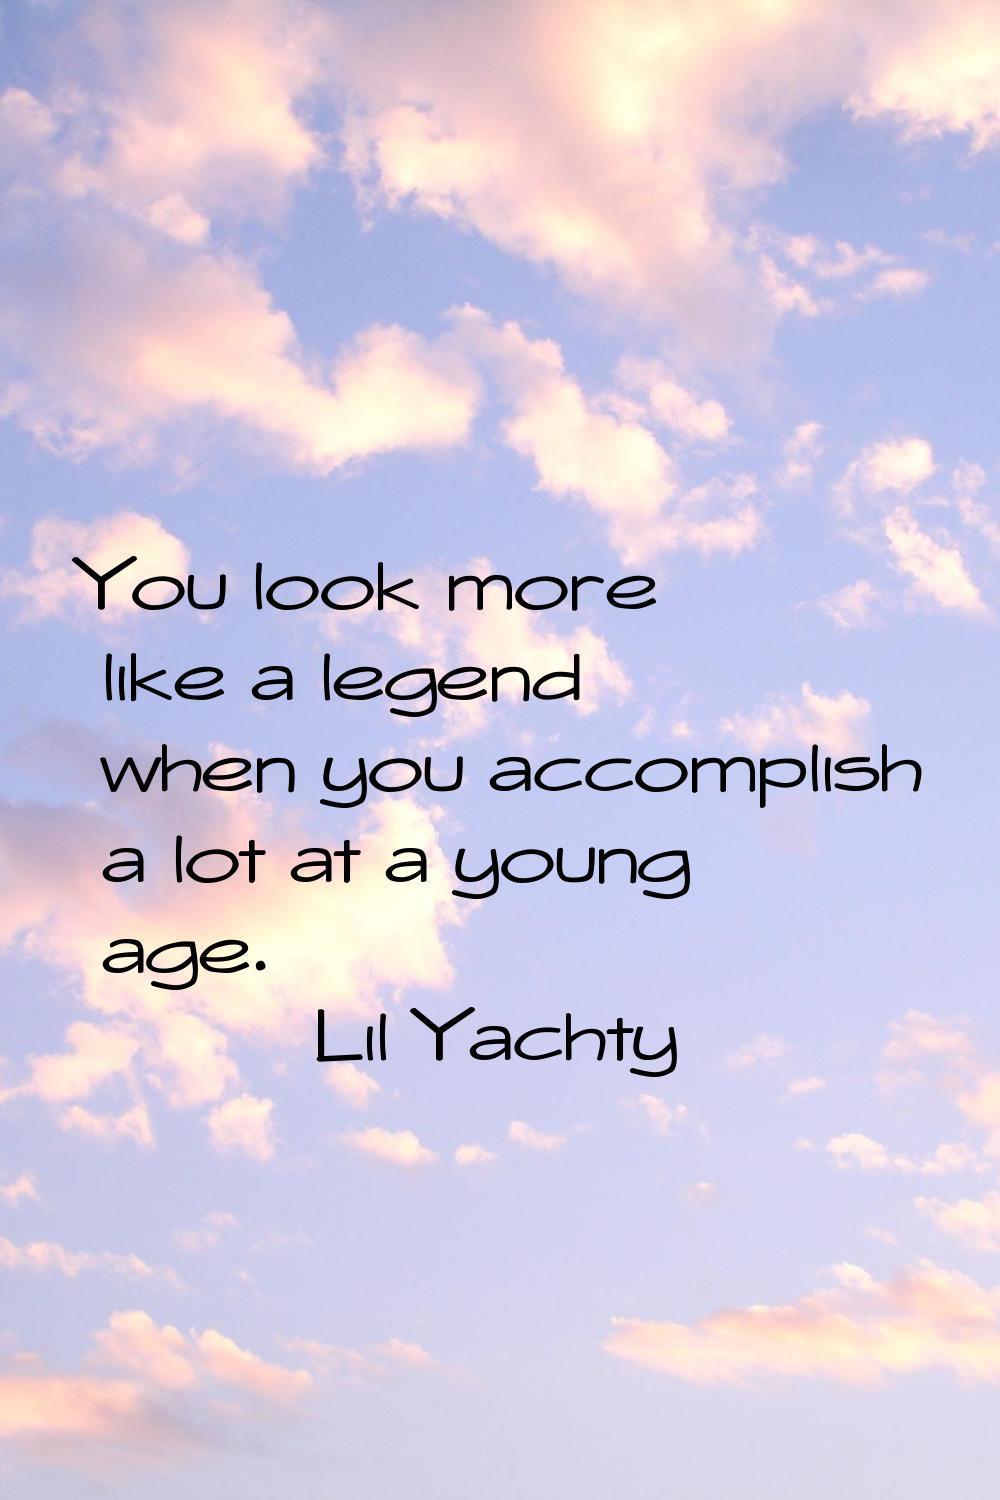 You look more like a legend when you accomplish a lot at a young age.